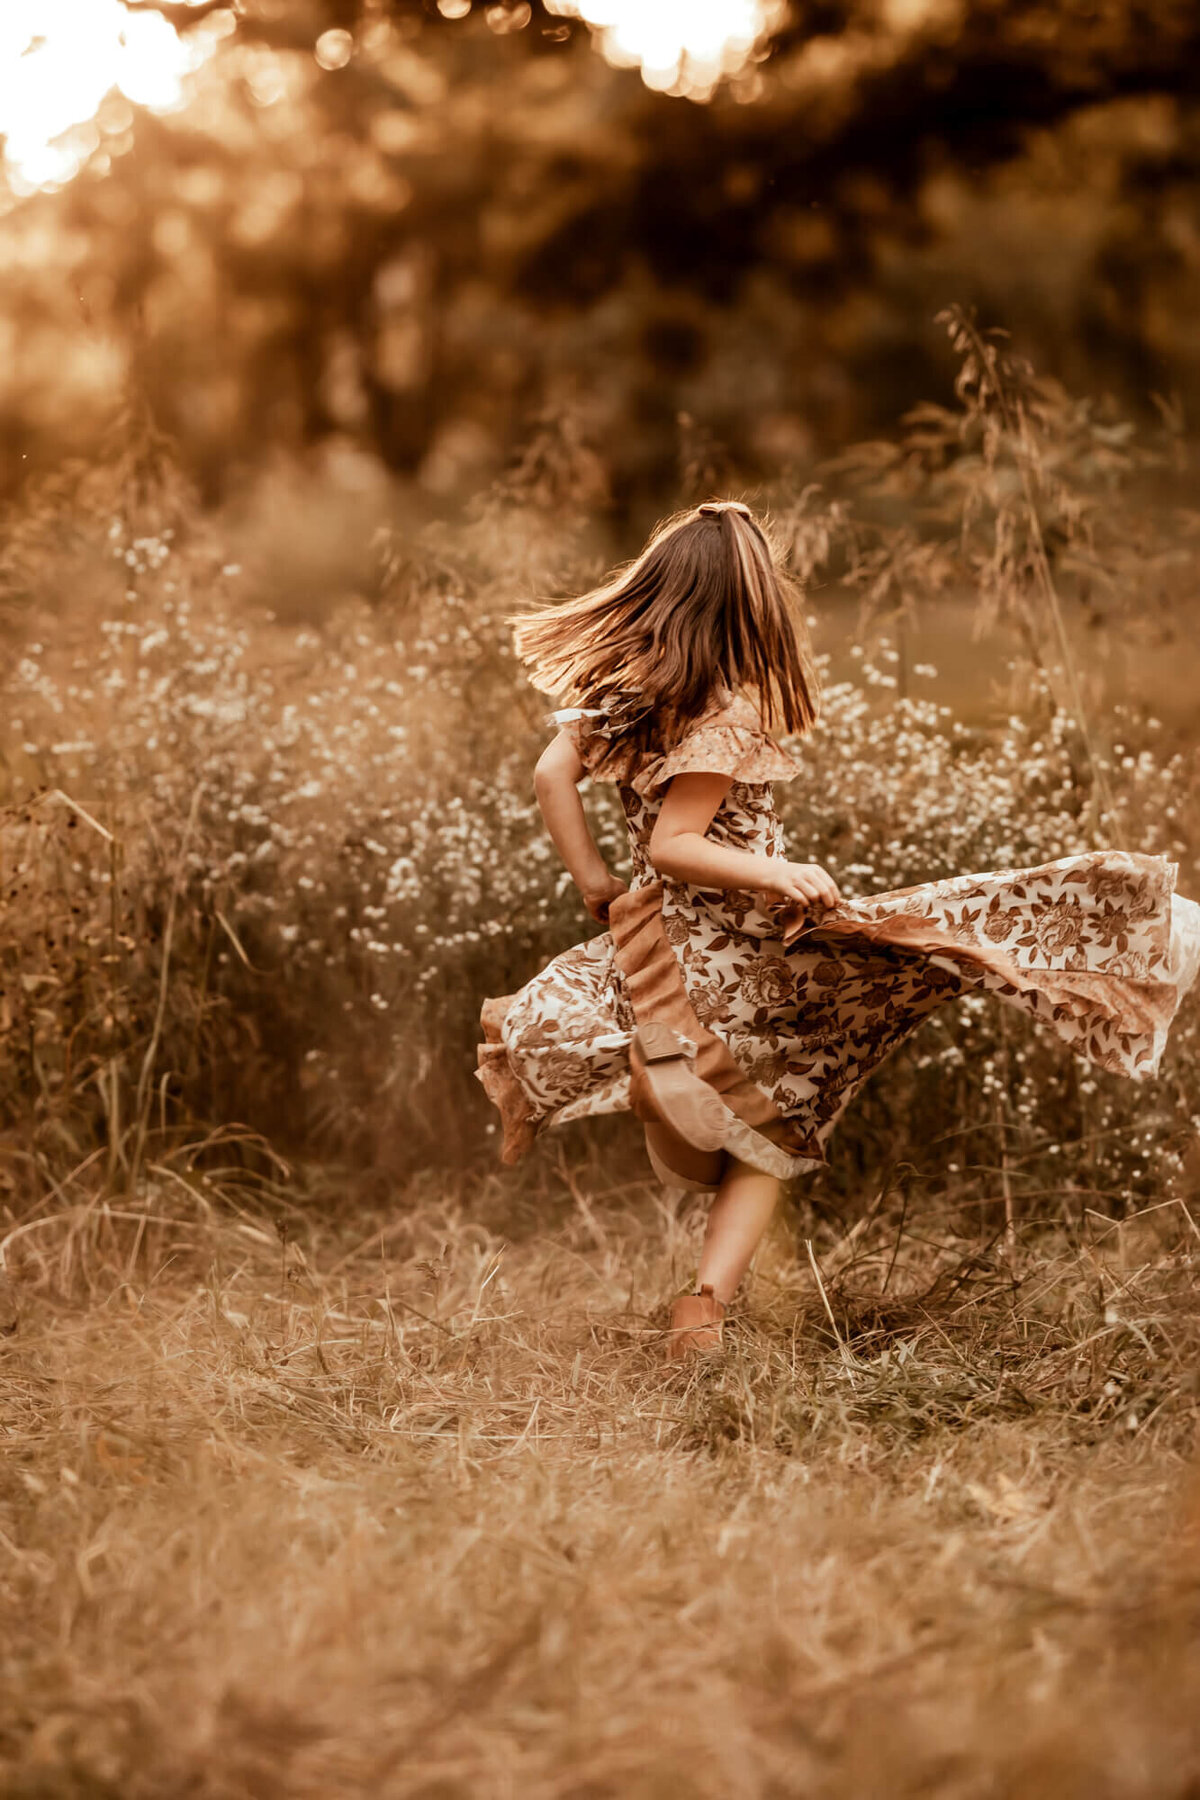 Girl spins in a field with her hair flying in the wind.